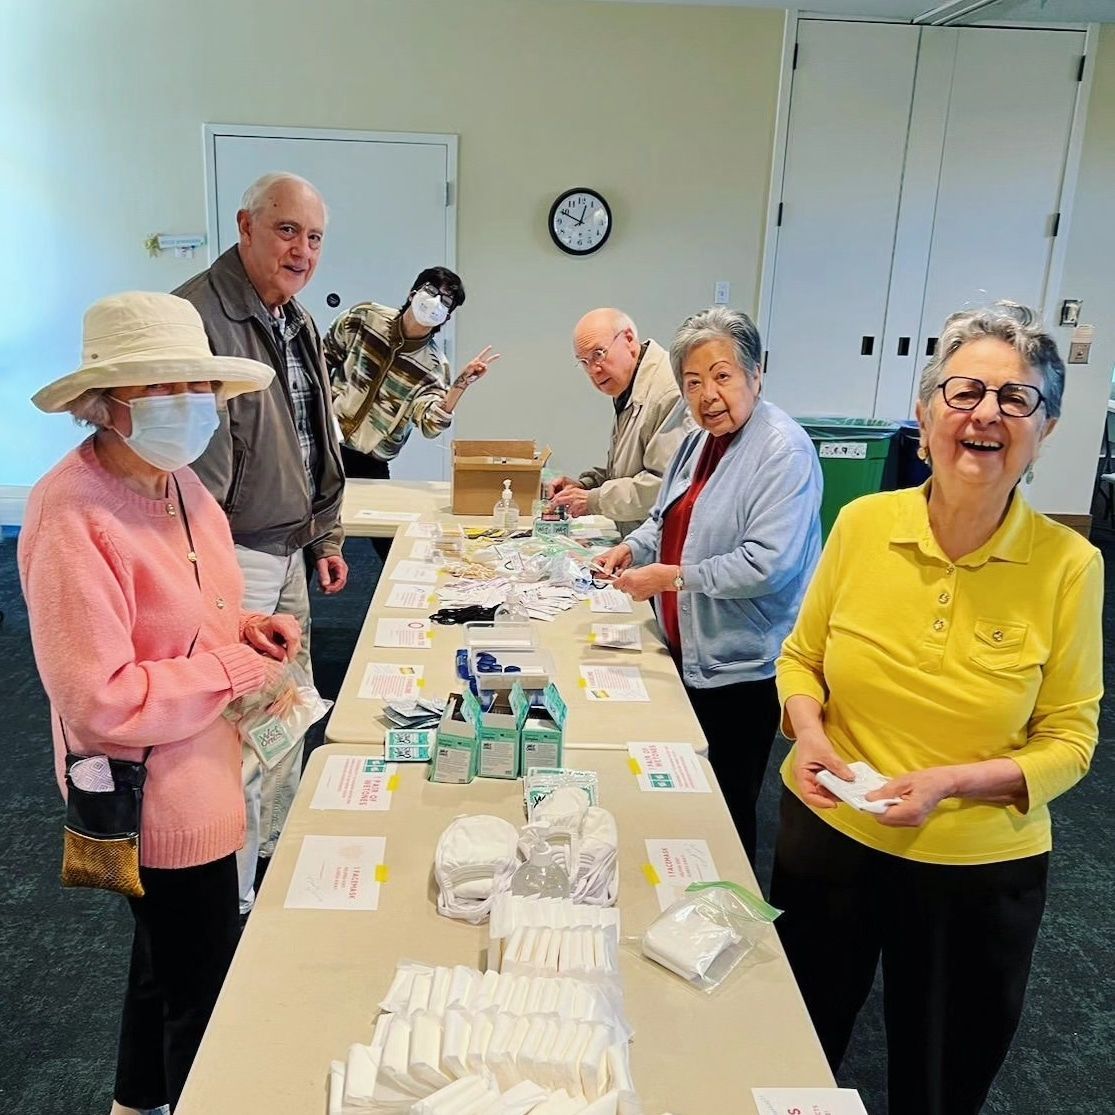 A group of Senior Adults packing hygiene kits for the Hope Center. There are various hygiene items on the table. Someone is giving a peace sign in the back.